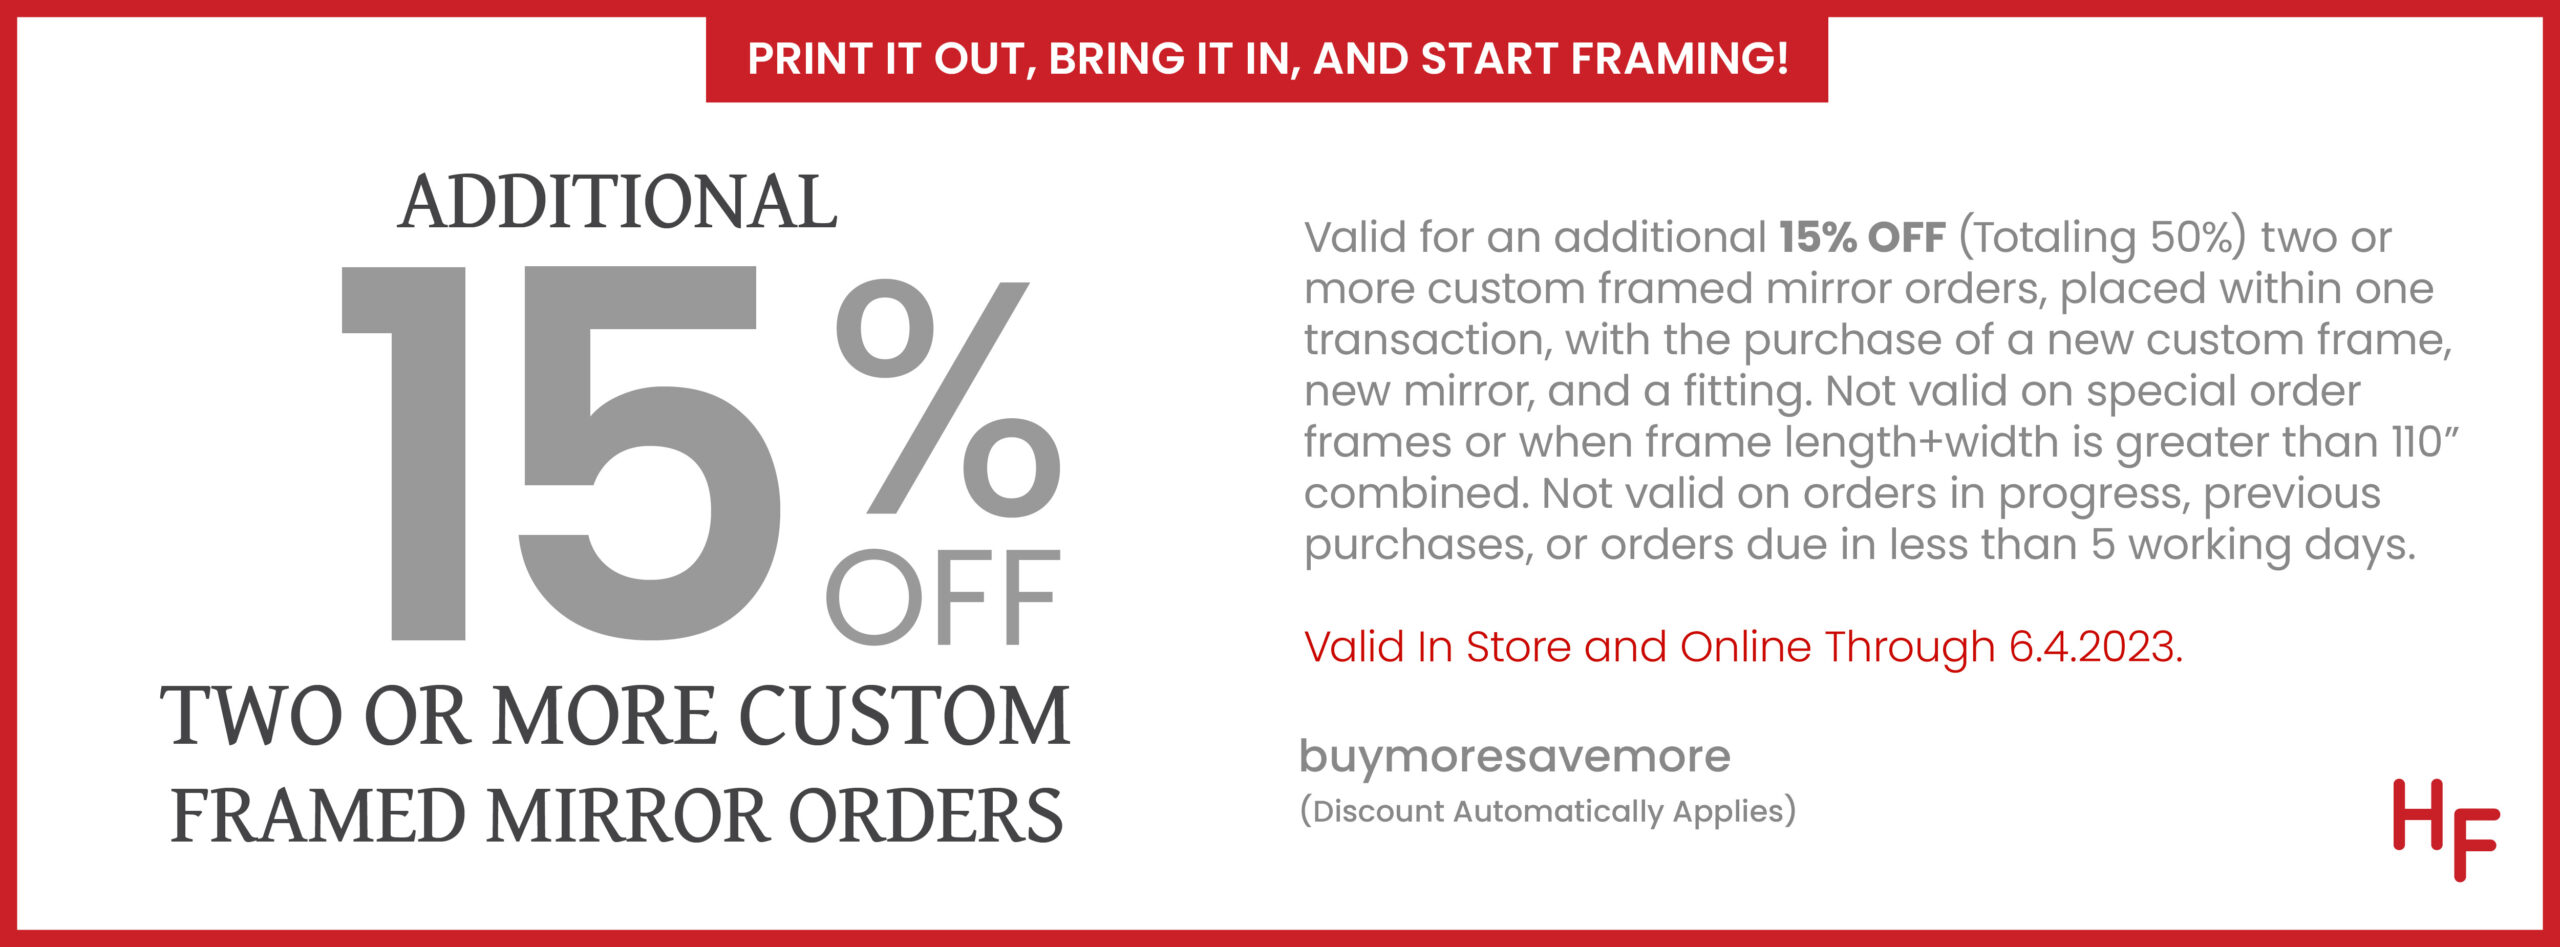 Additional 15% off with the Purchase of Two or More Custom Framed Mirrors